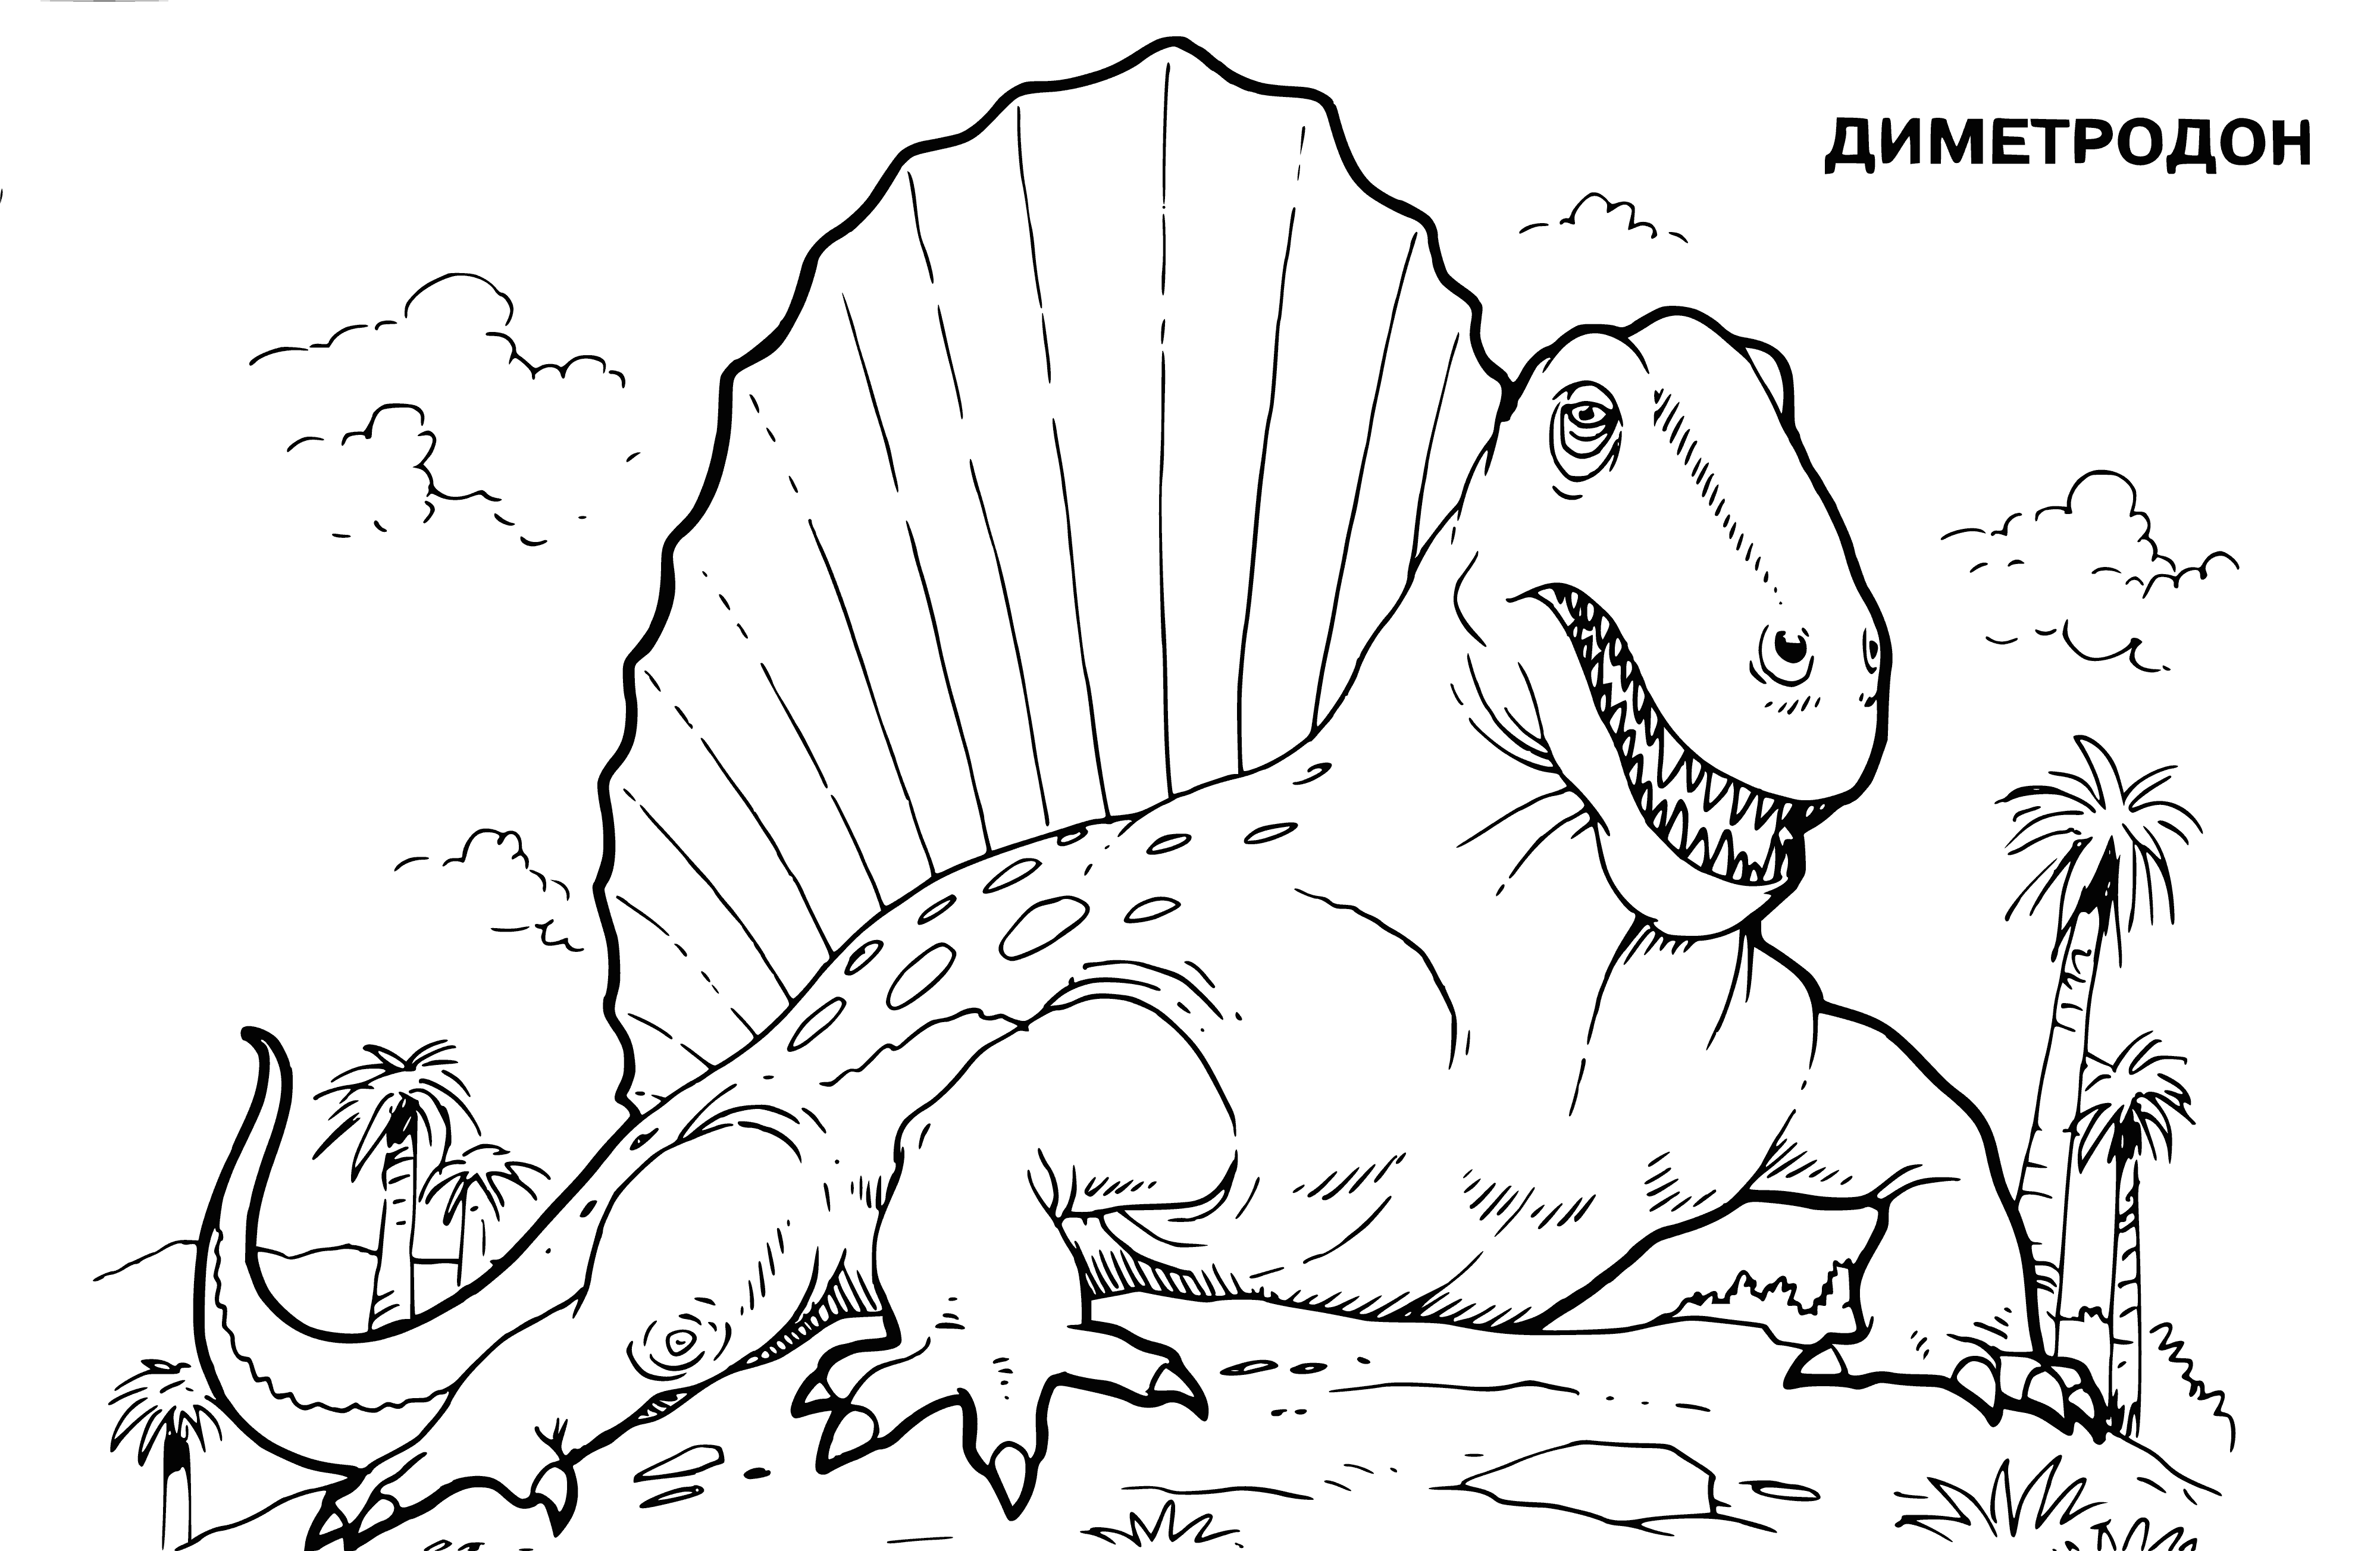 coloring page: : Large green dino w/ long neck & tail, small arms & legs.